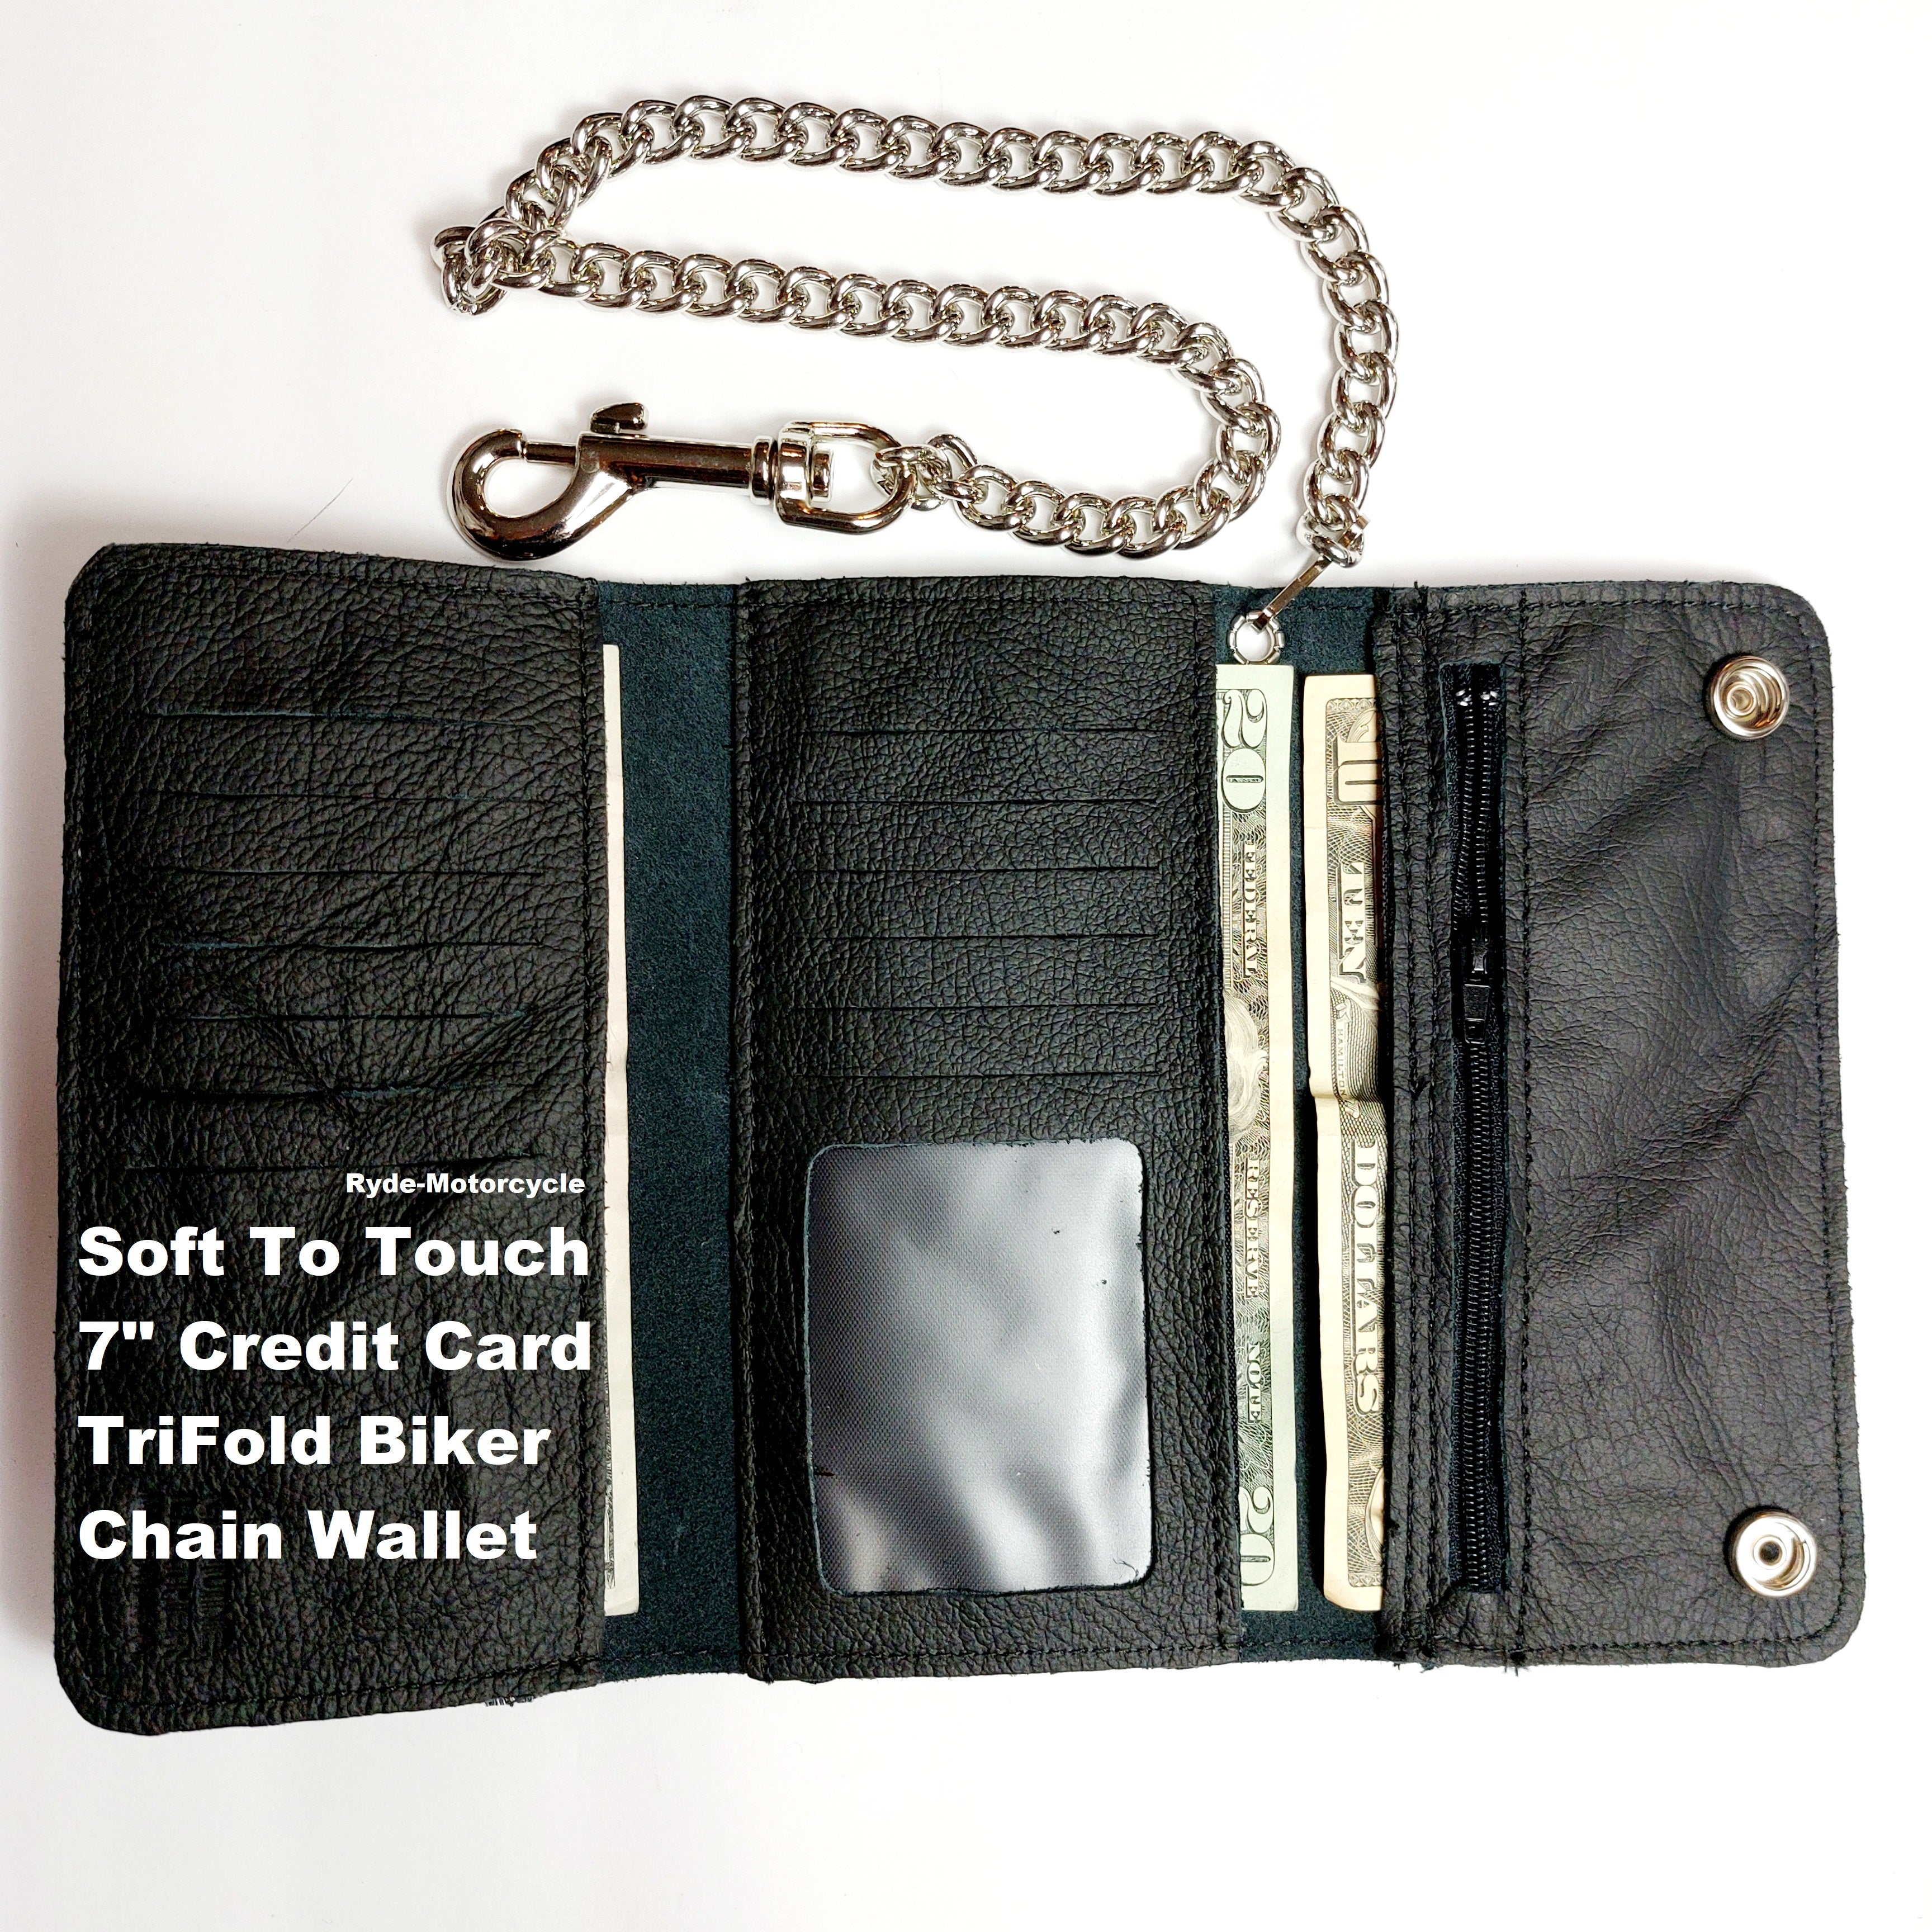 7" Trifold Credit Card Soft Leather Motorcycle Chain Wallet BW339